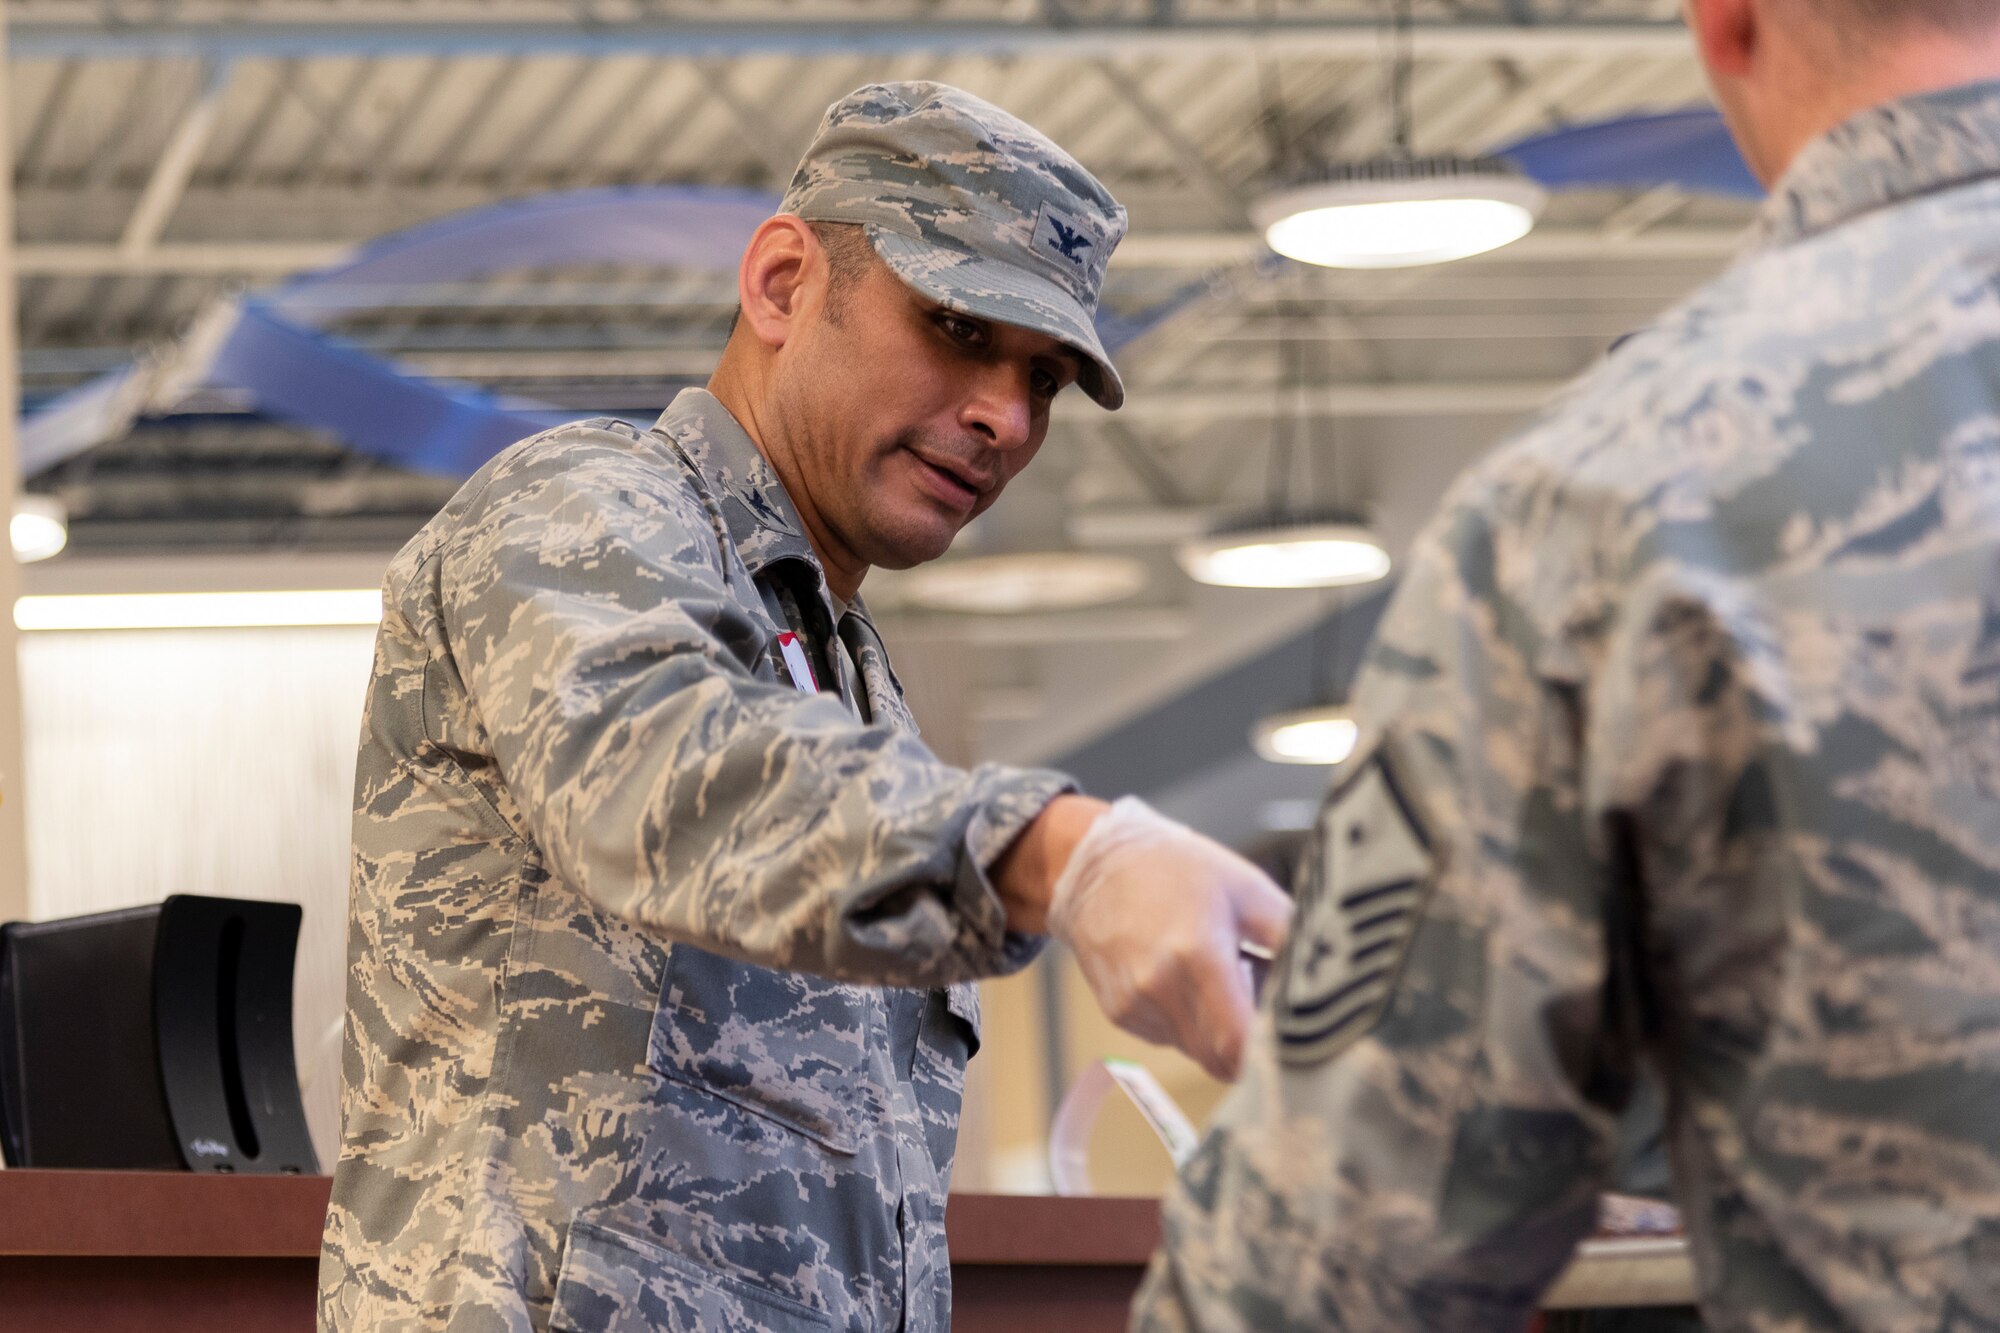 Col. Benjamin Conde, 23d Wing vice commander, serves food during a deployed spouse dinner, June 18, 2019, at Moody Air Force Base, Ga. The dinner served as an opportunity for the families of deployed members to bond and provide relief. The mission's success depends on resilient Airmen and families, who are prepared to make sacrifices with the support of their fellow Airmen, local communities and leadership. (U.S. Air Force photo by Airman 1st Class Hayden Legg)